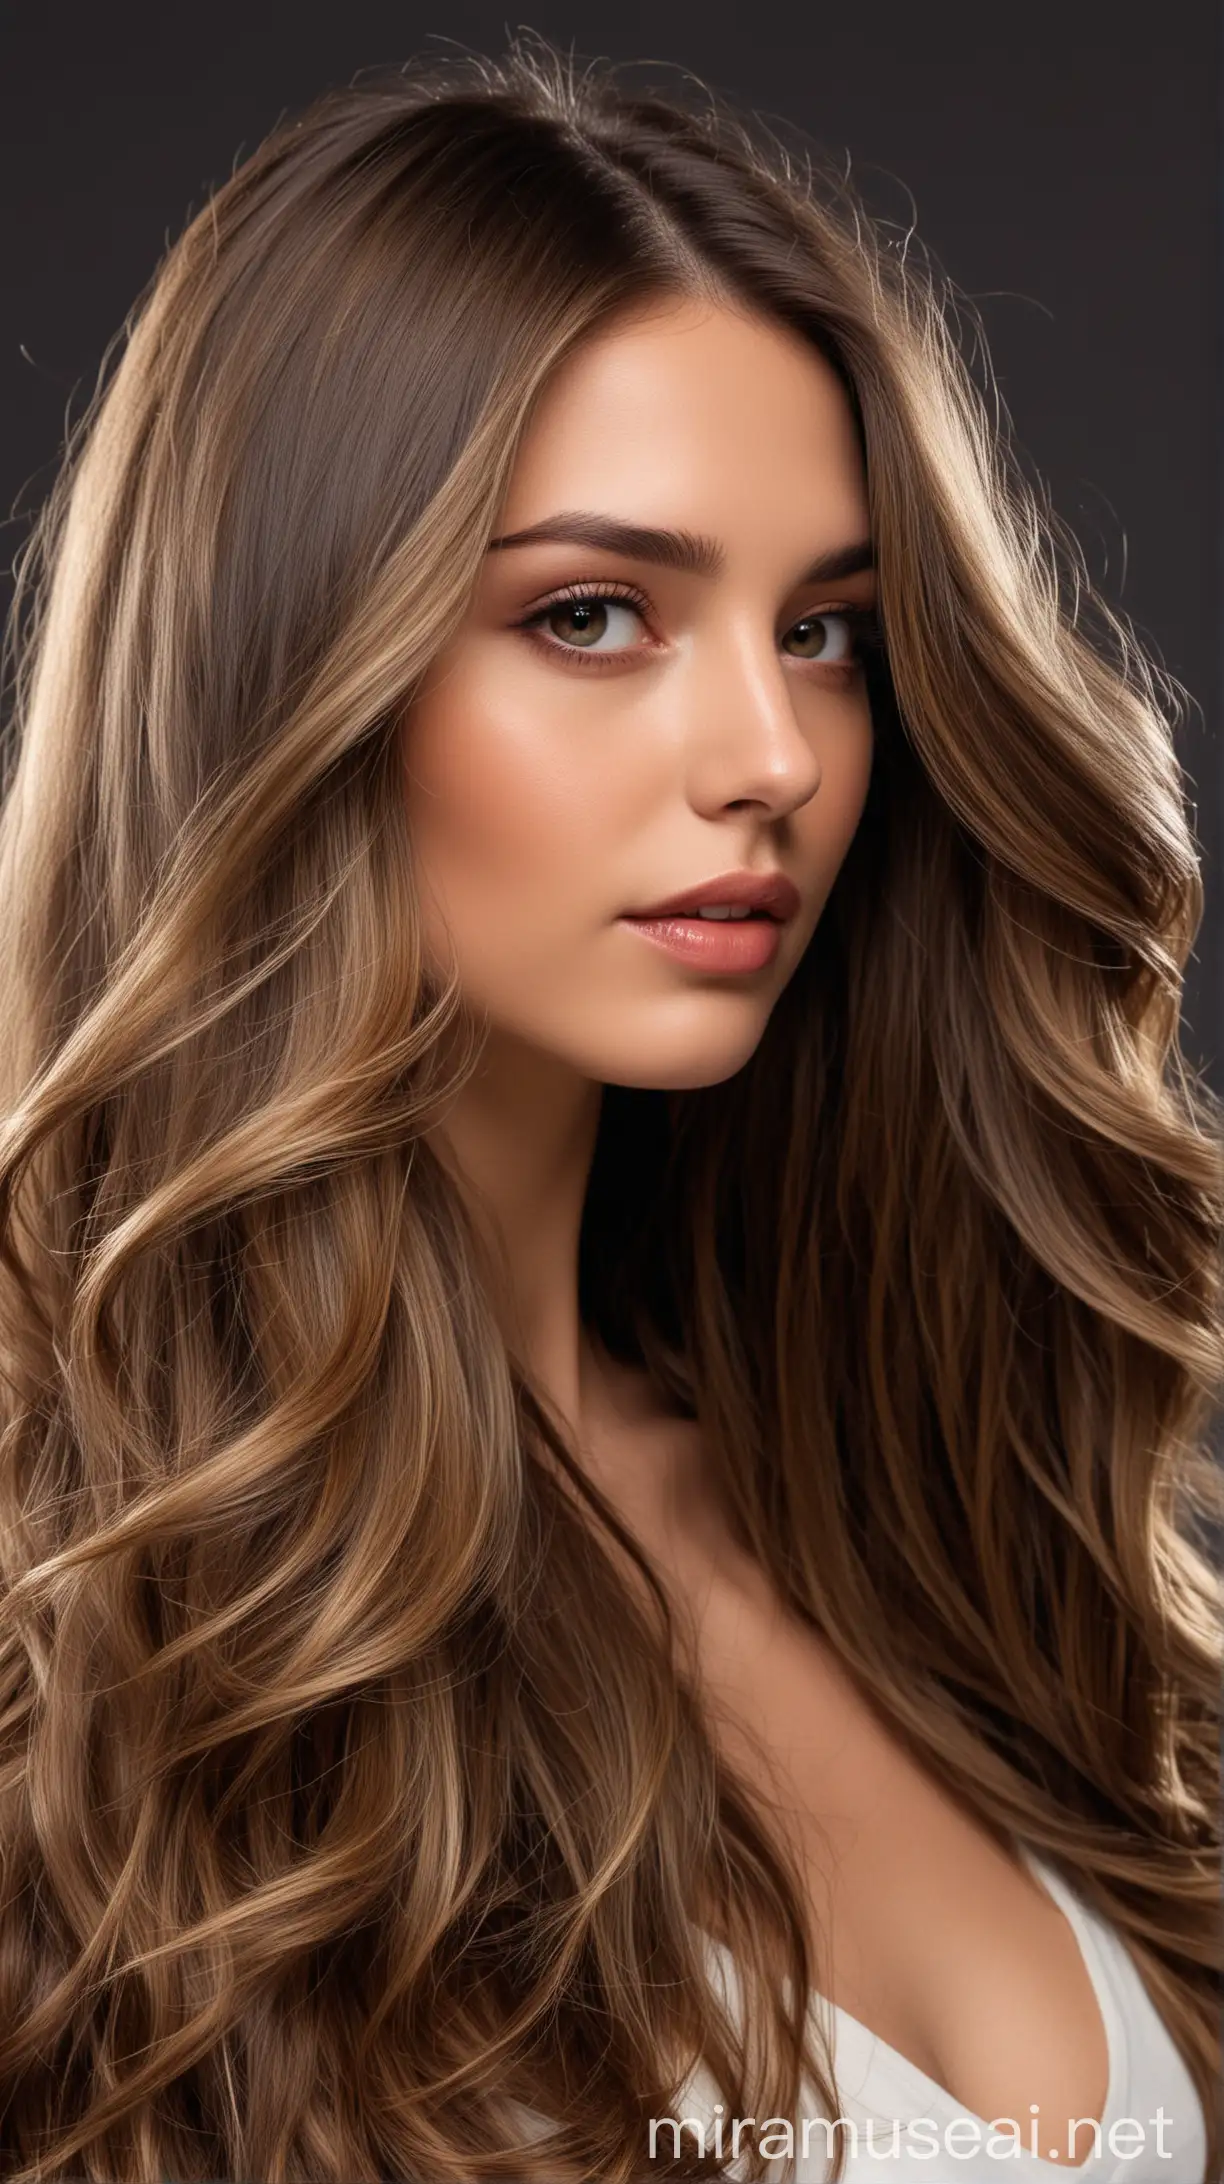 Perfil model with spectacular long brunette balayage hair